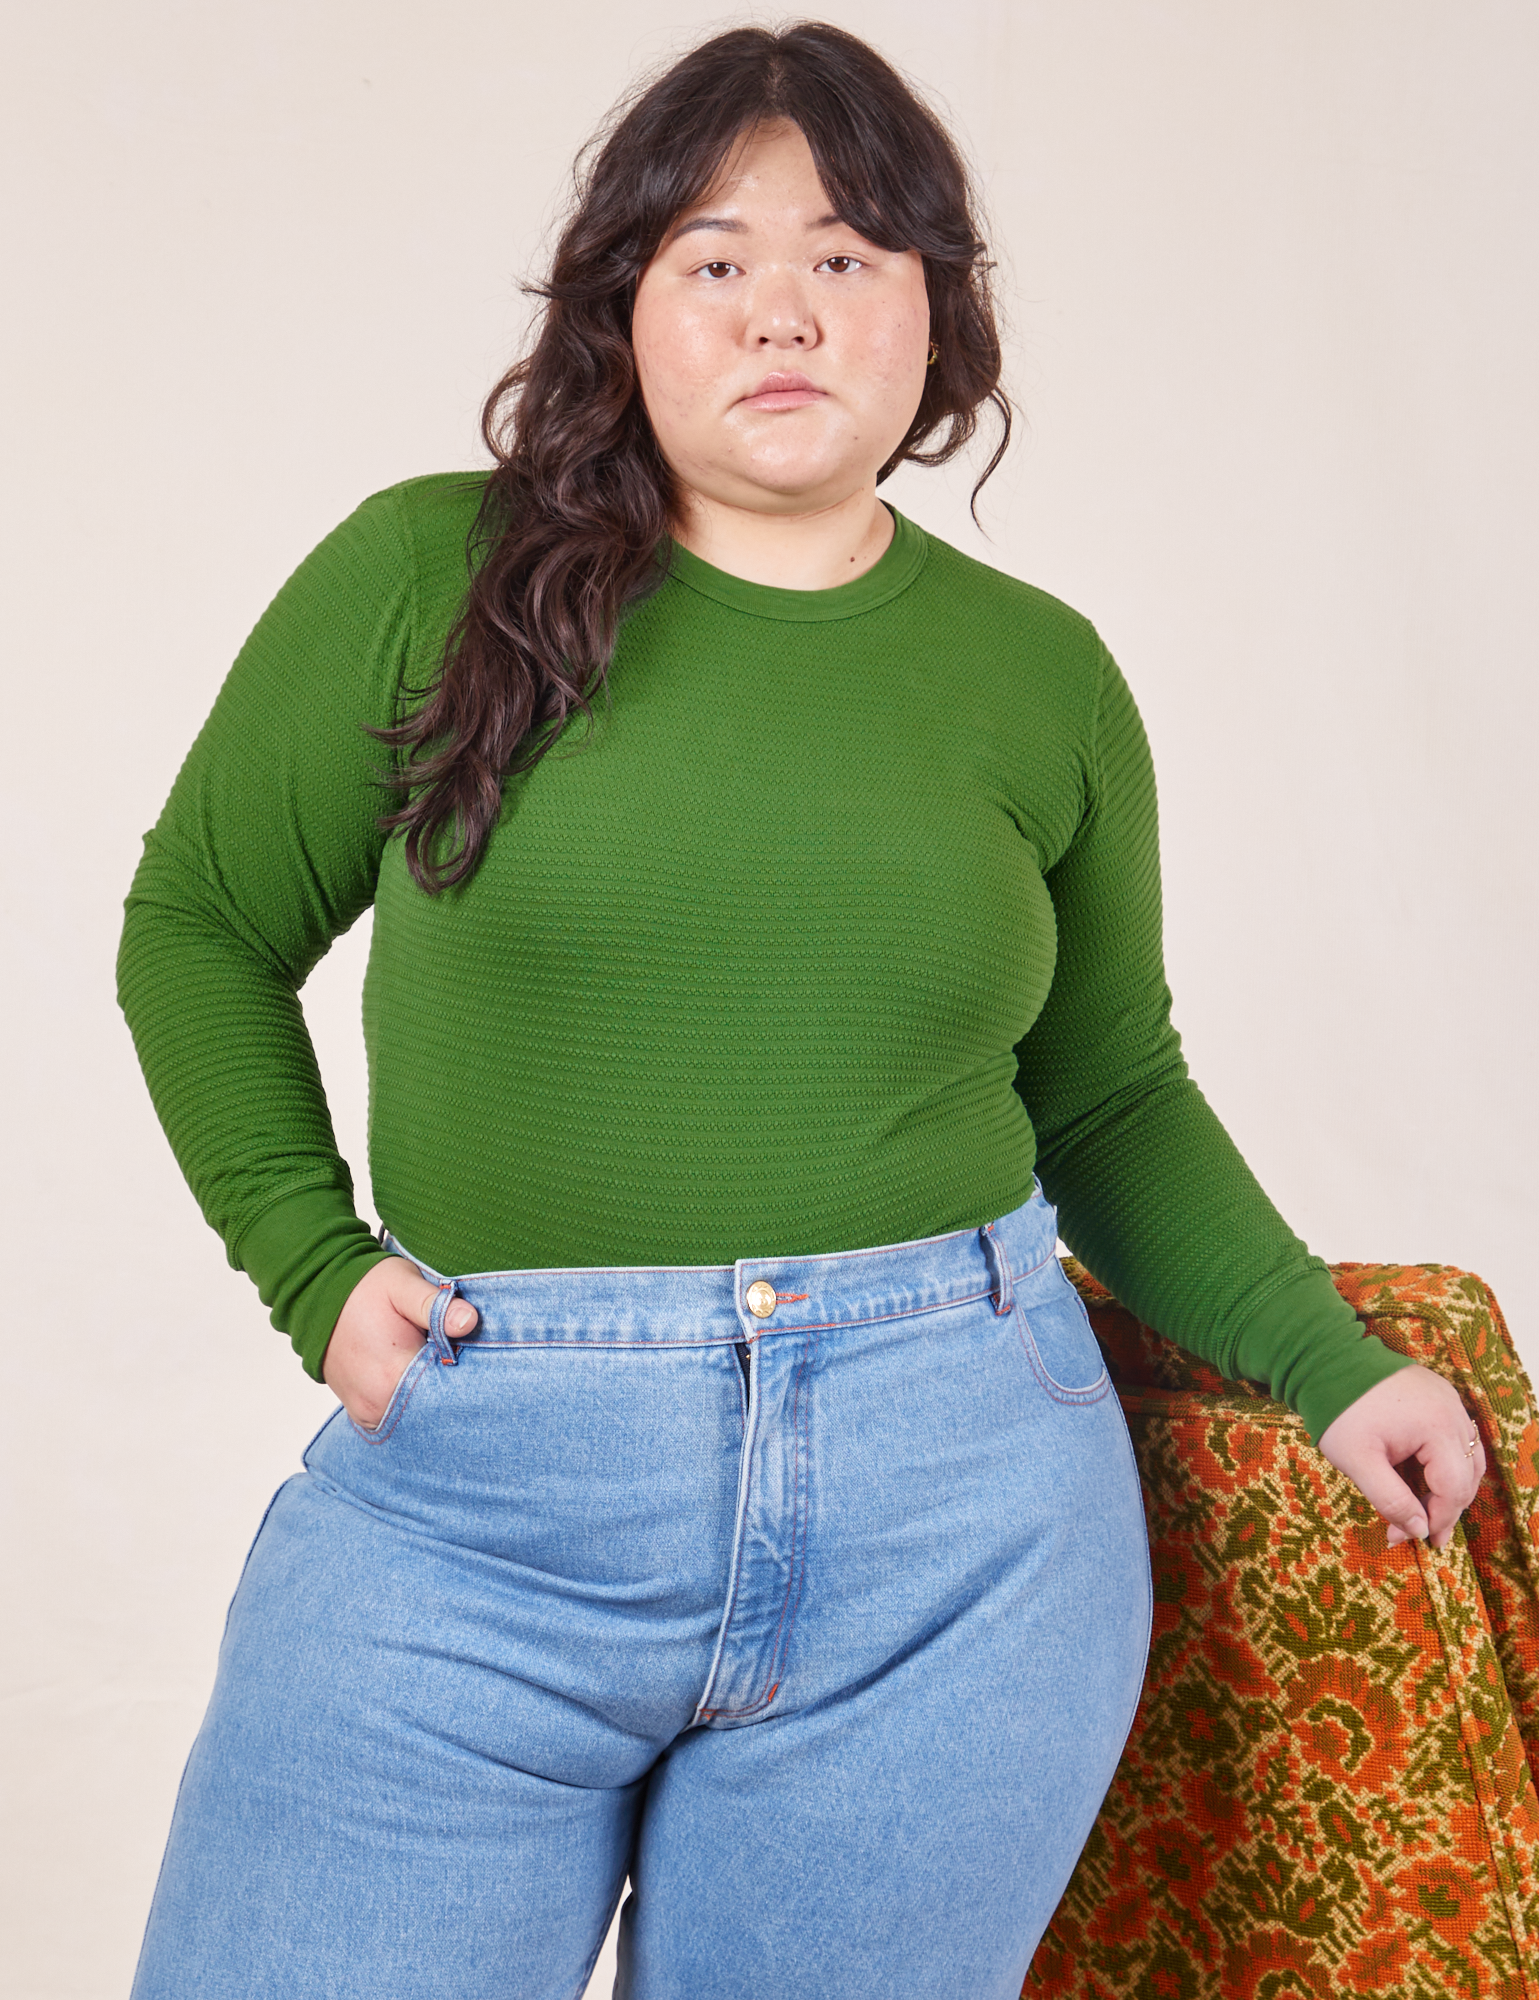 Ashley is wearing Honeycomb Thermal in Lawn Green